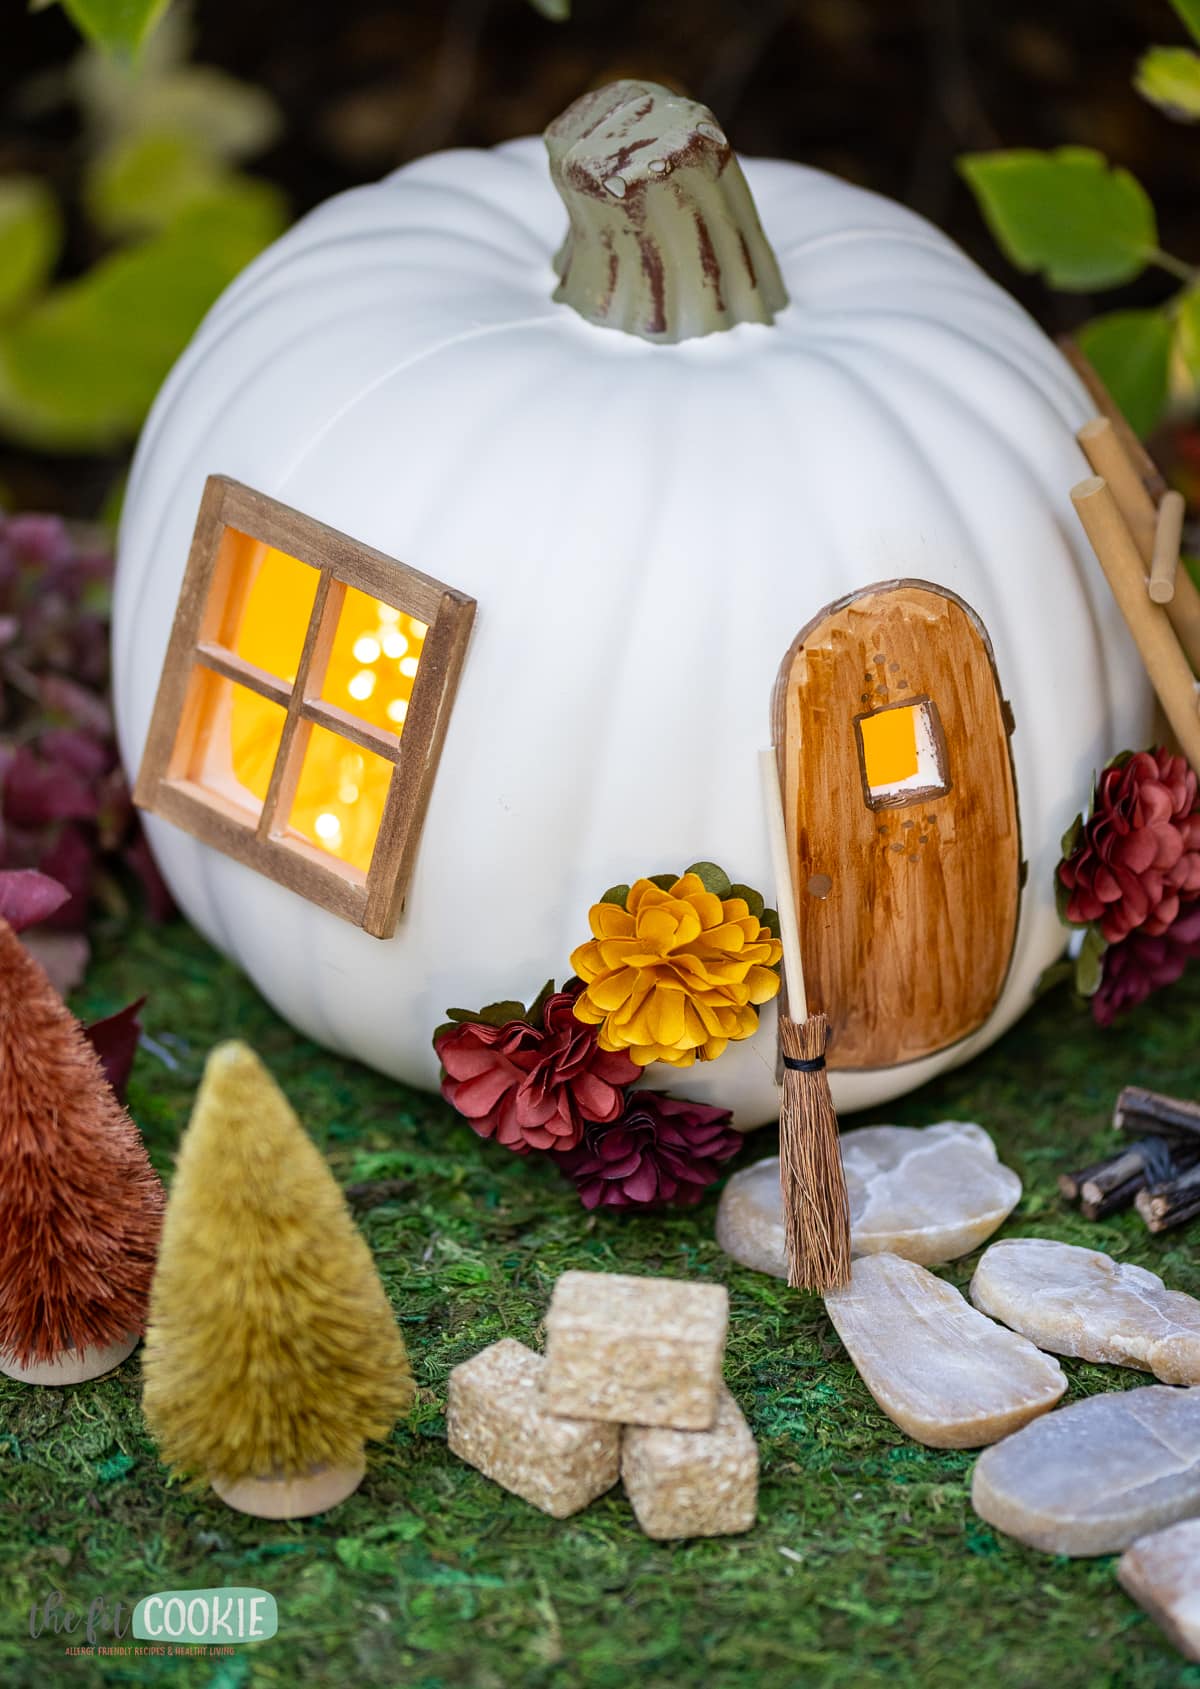 A fairy house pumpkin nestled in a grassy area.